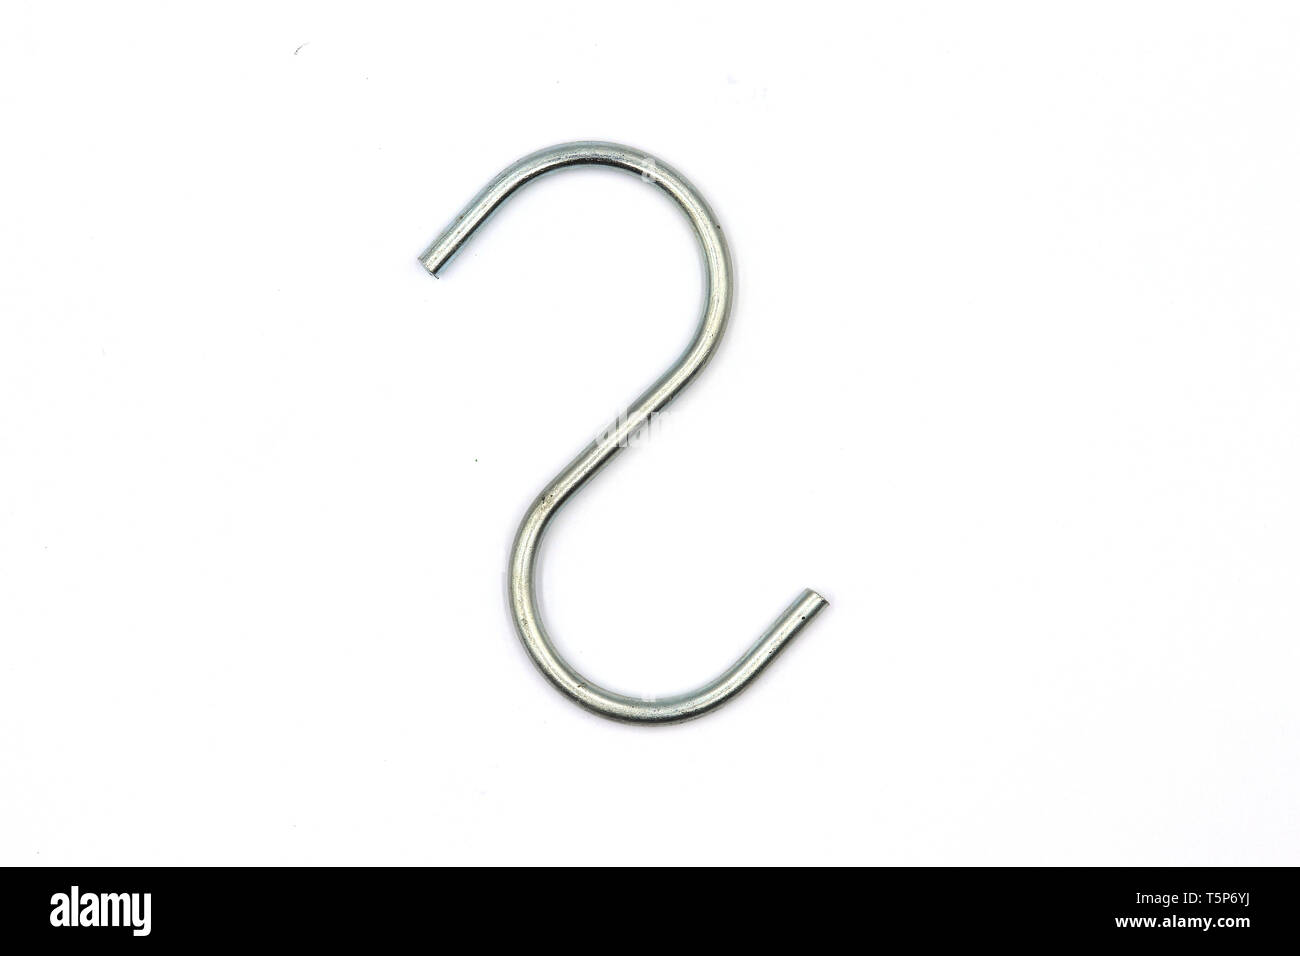 Metal hooks,  meat hook isolated on white background - Image High resolution image gallery. Stock Photo